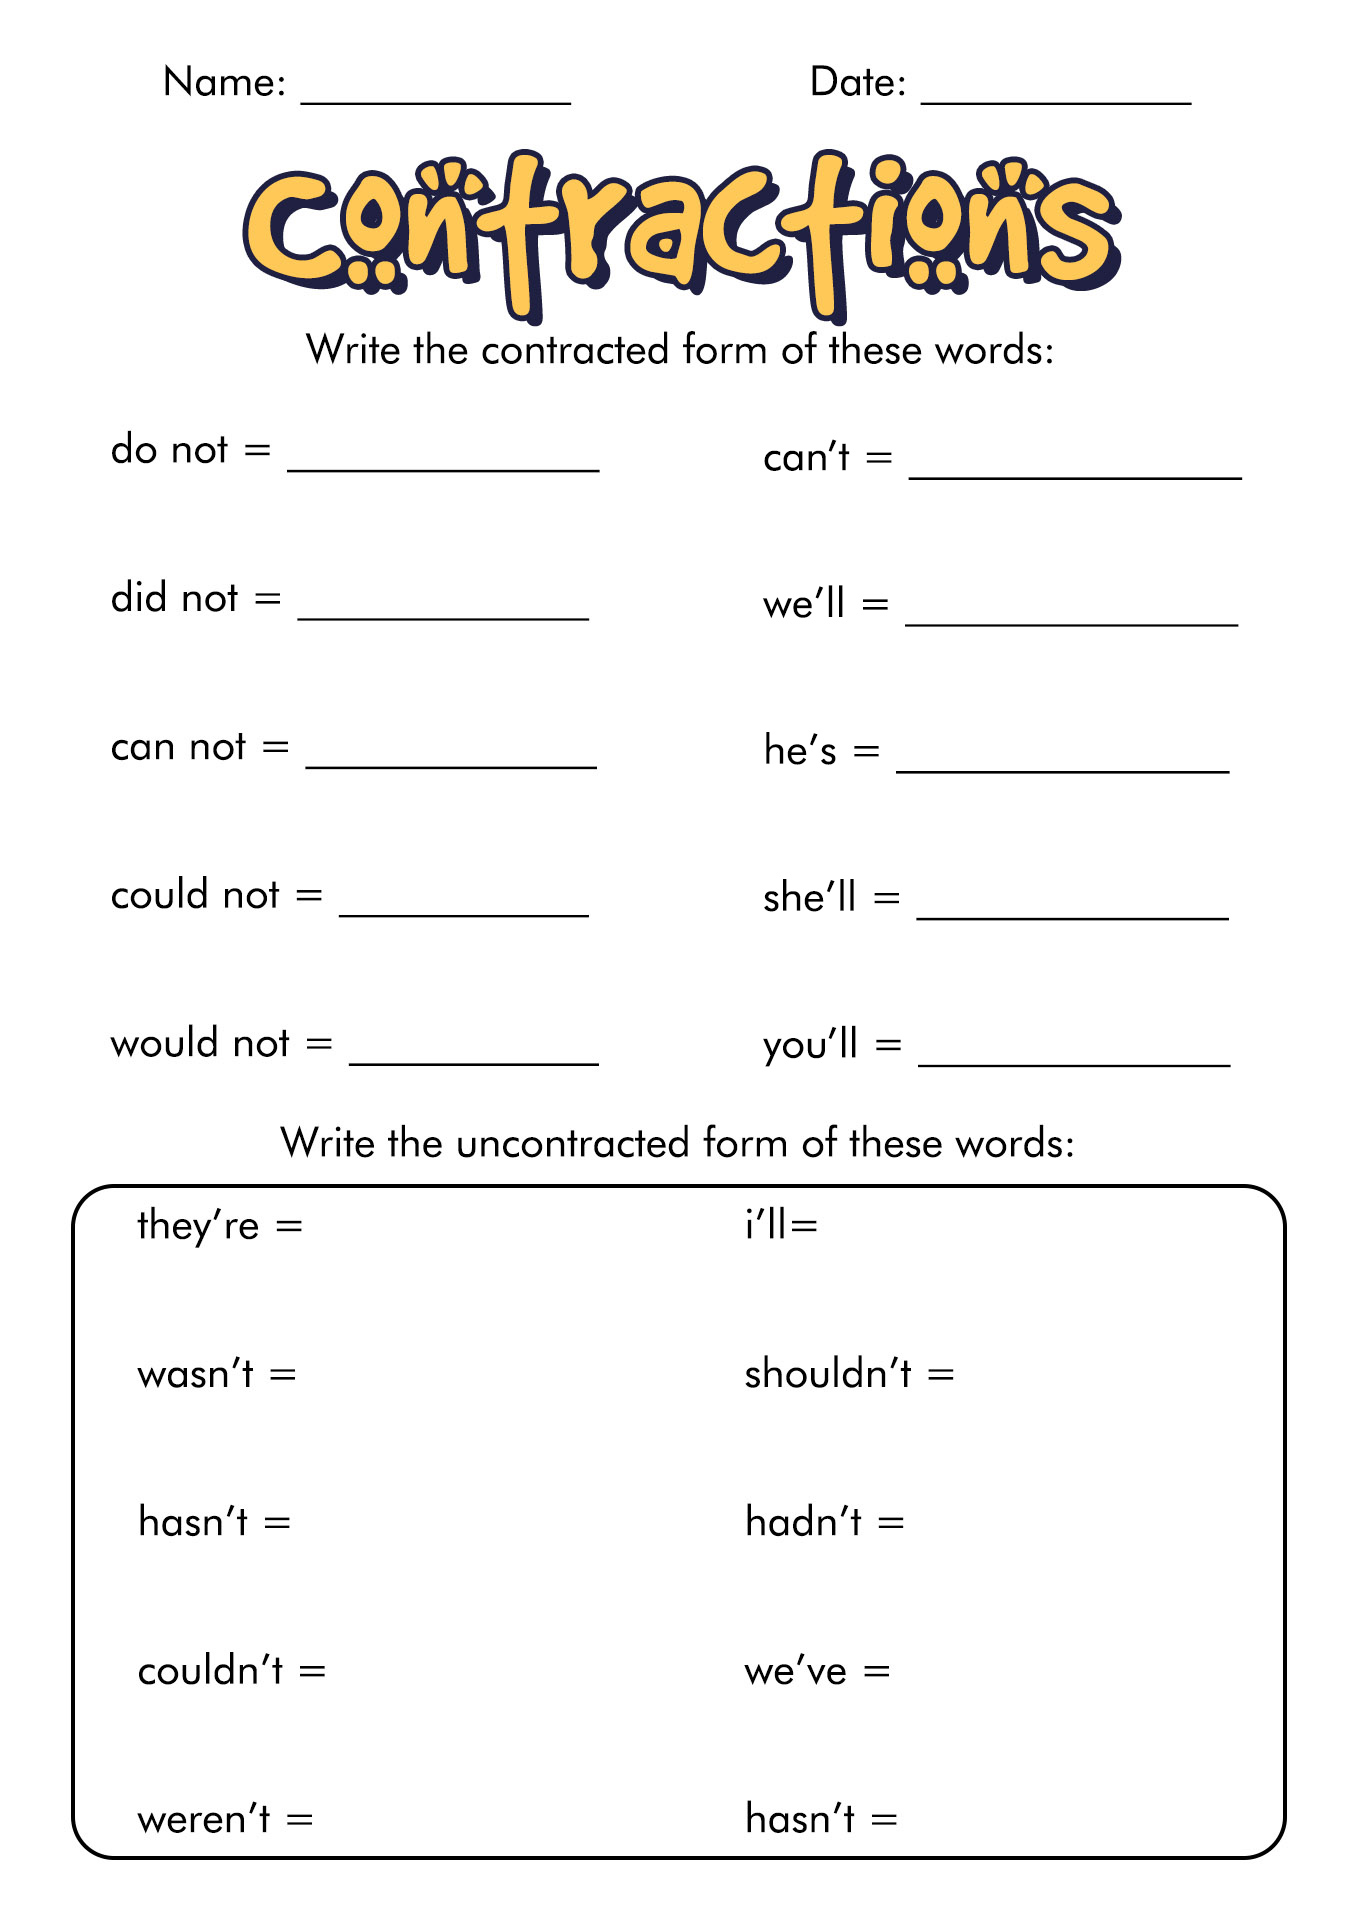 contraction-worksheets-and-activity-cupcake-theme-homeschool-den